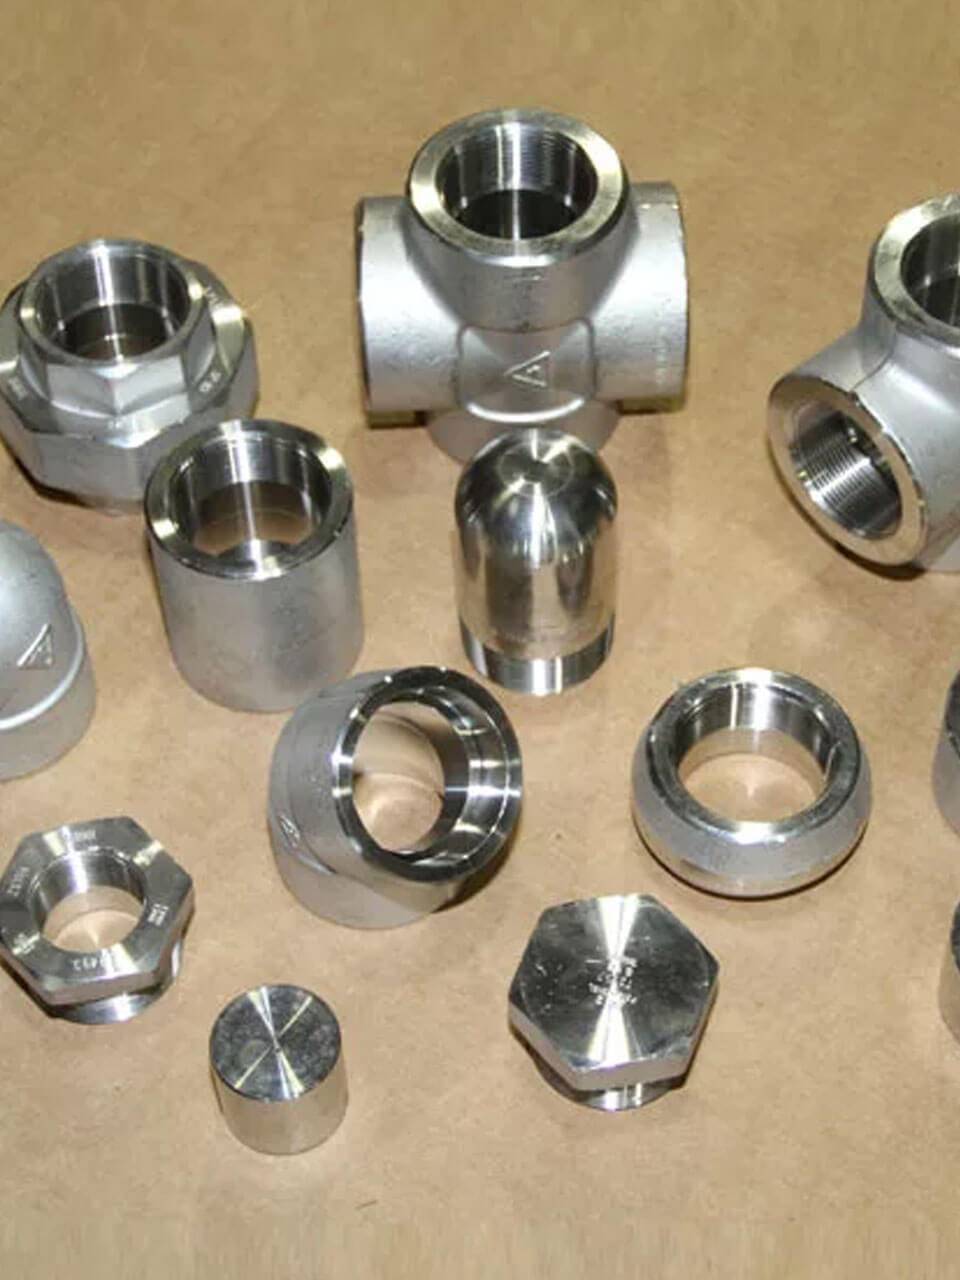 Inconel 625 Forged Fittings